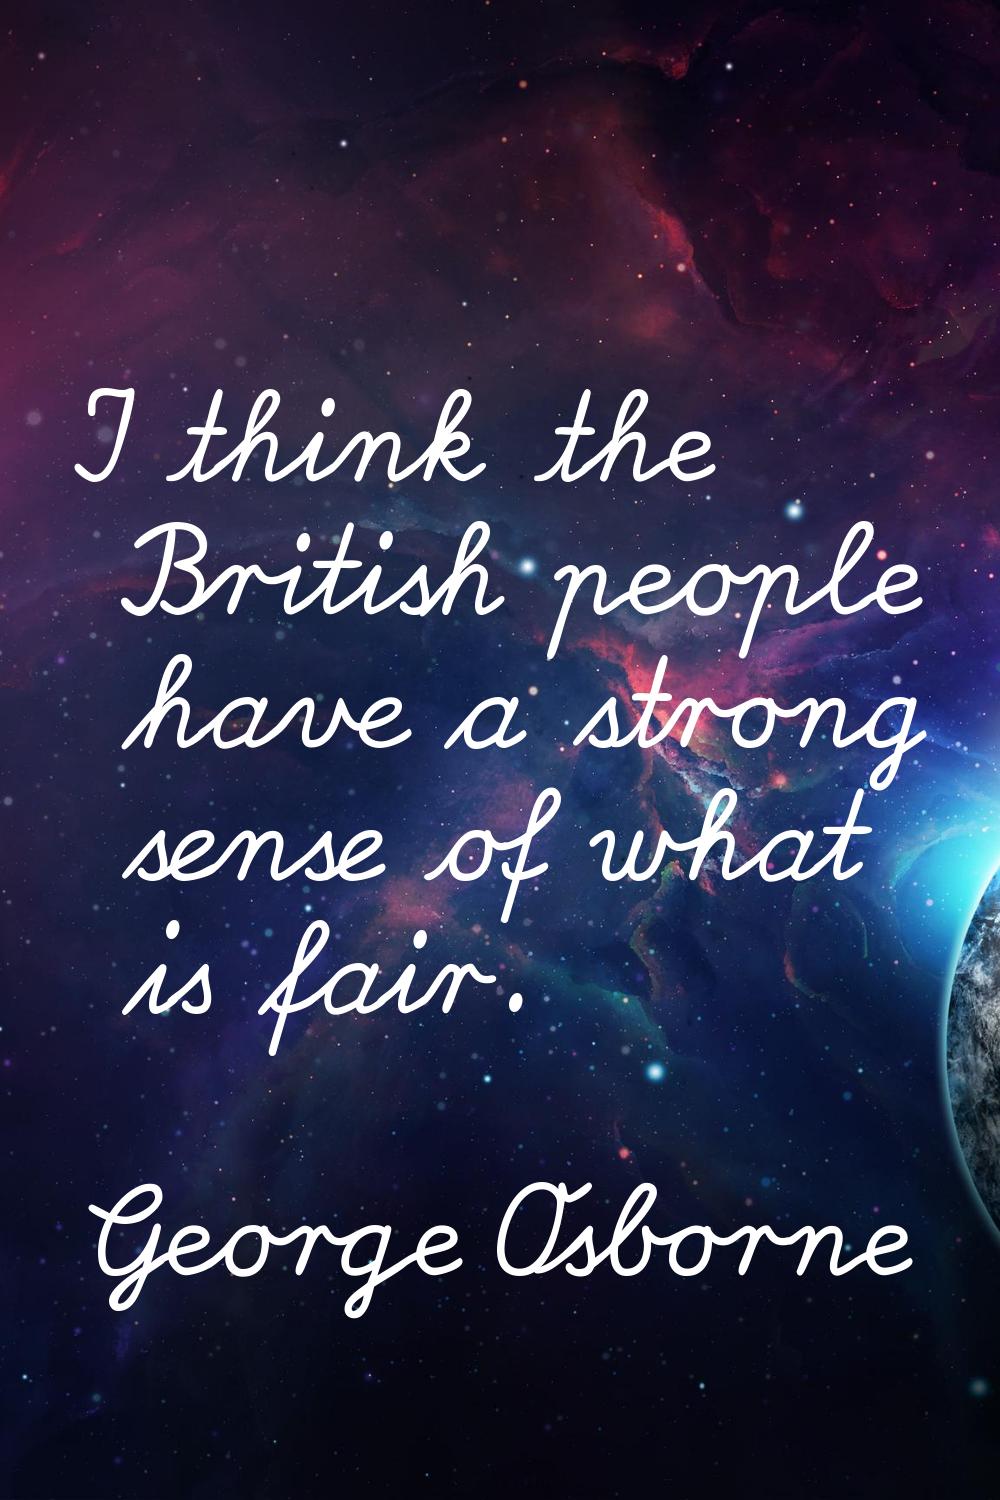 I think the British people have a strong sense of what is fair.